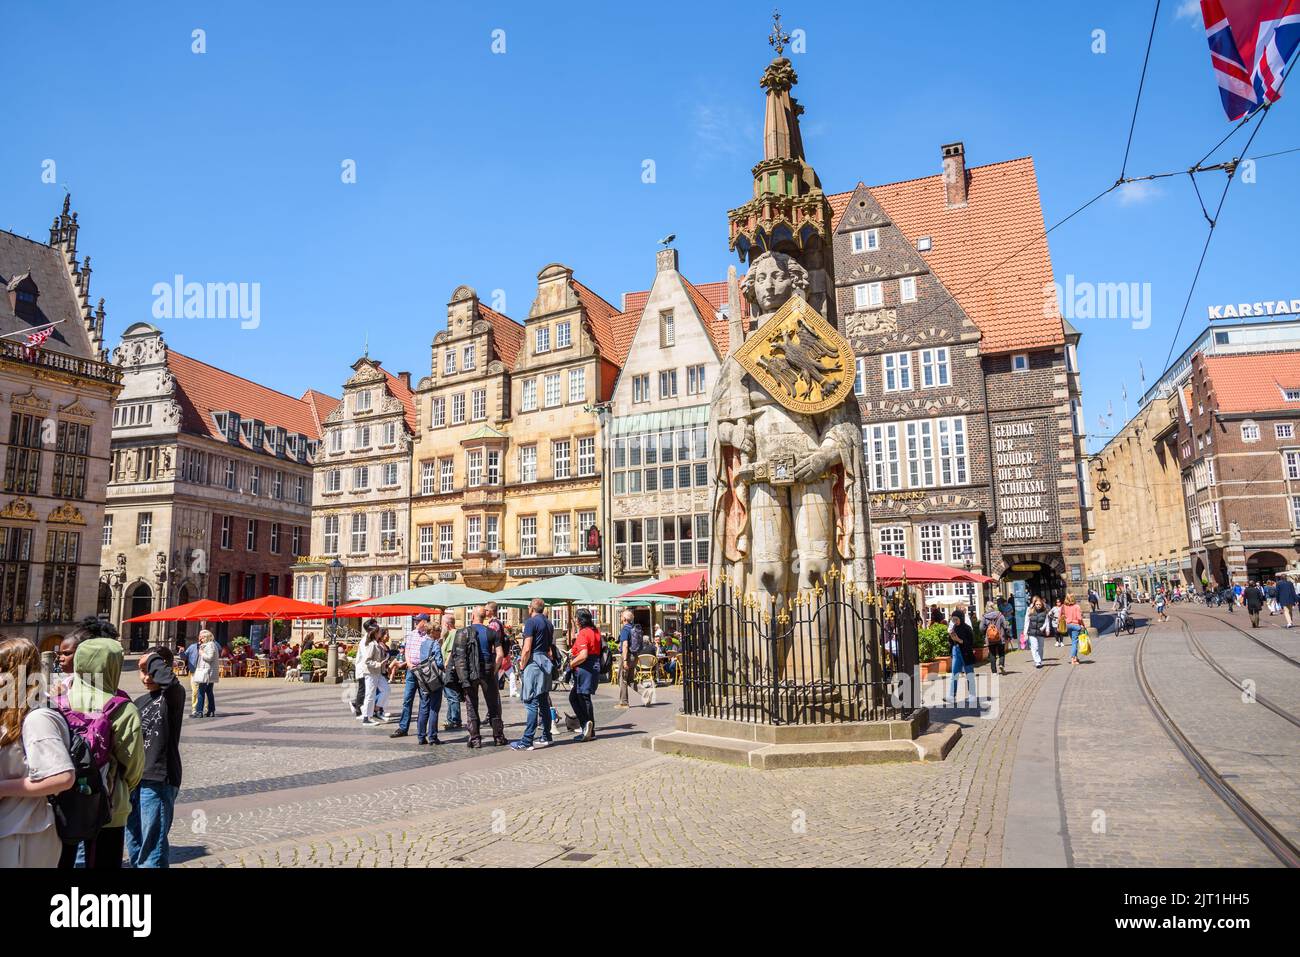 Bremen, Germany - June 21, 2022: Roland statue in Market square on a sunny day. The stone statue, erected in 1404, symbolised the freedom and independ Stock Photo